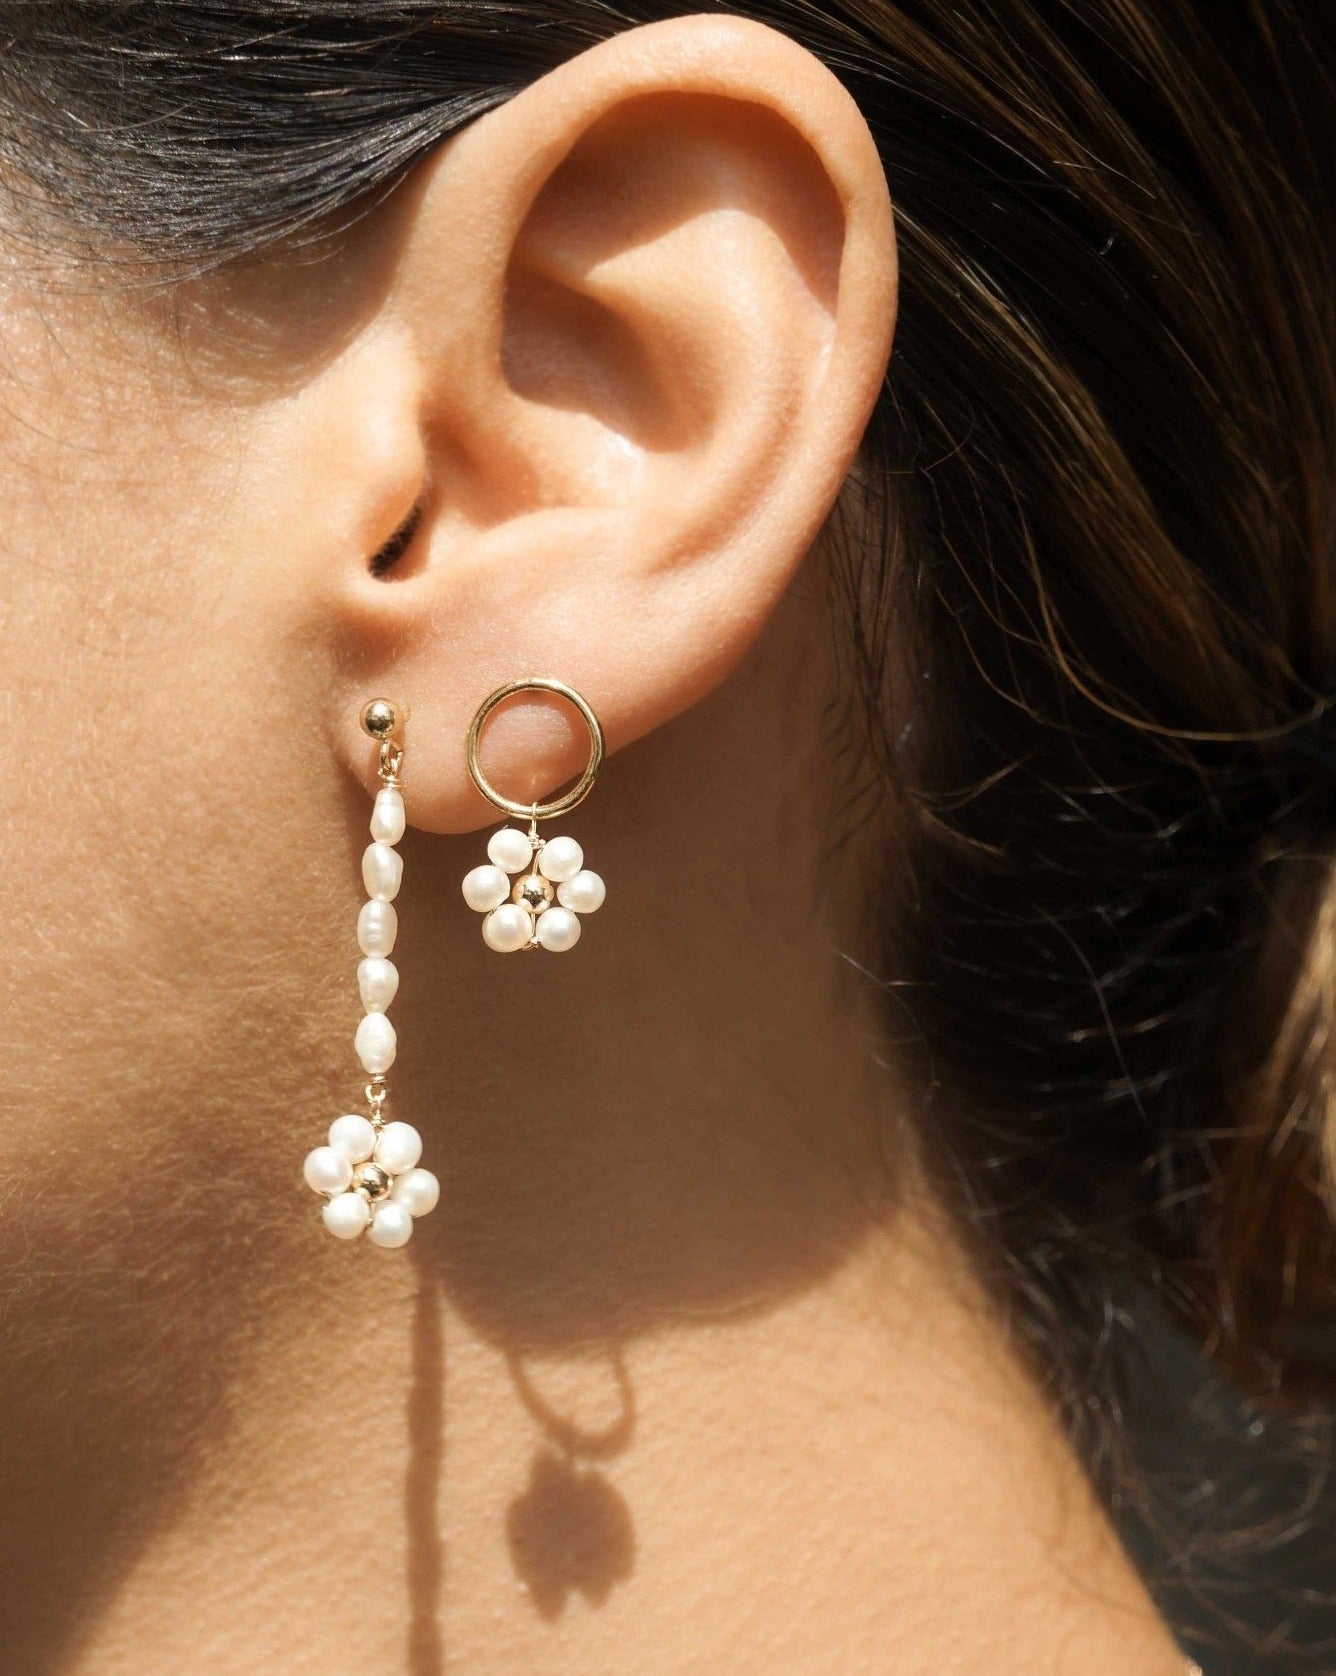 Sunflower Earrings by KOZAKH. 3mm Ball stud drop earrings with 2 inches drop length, crafted in 14K Gold Filled, featuring 3mm rice freshwater Pearls and 3-4mm round freshwater Pearls forming a flower charm.